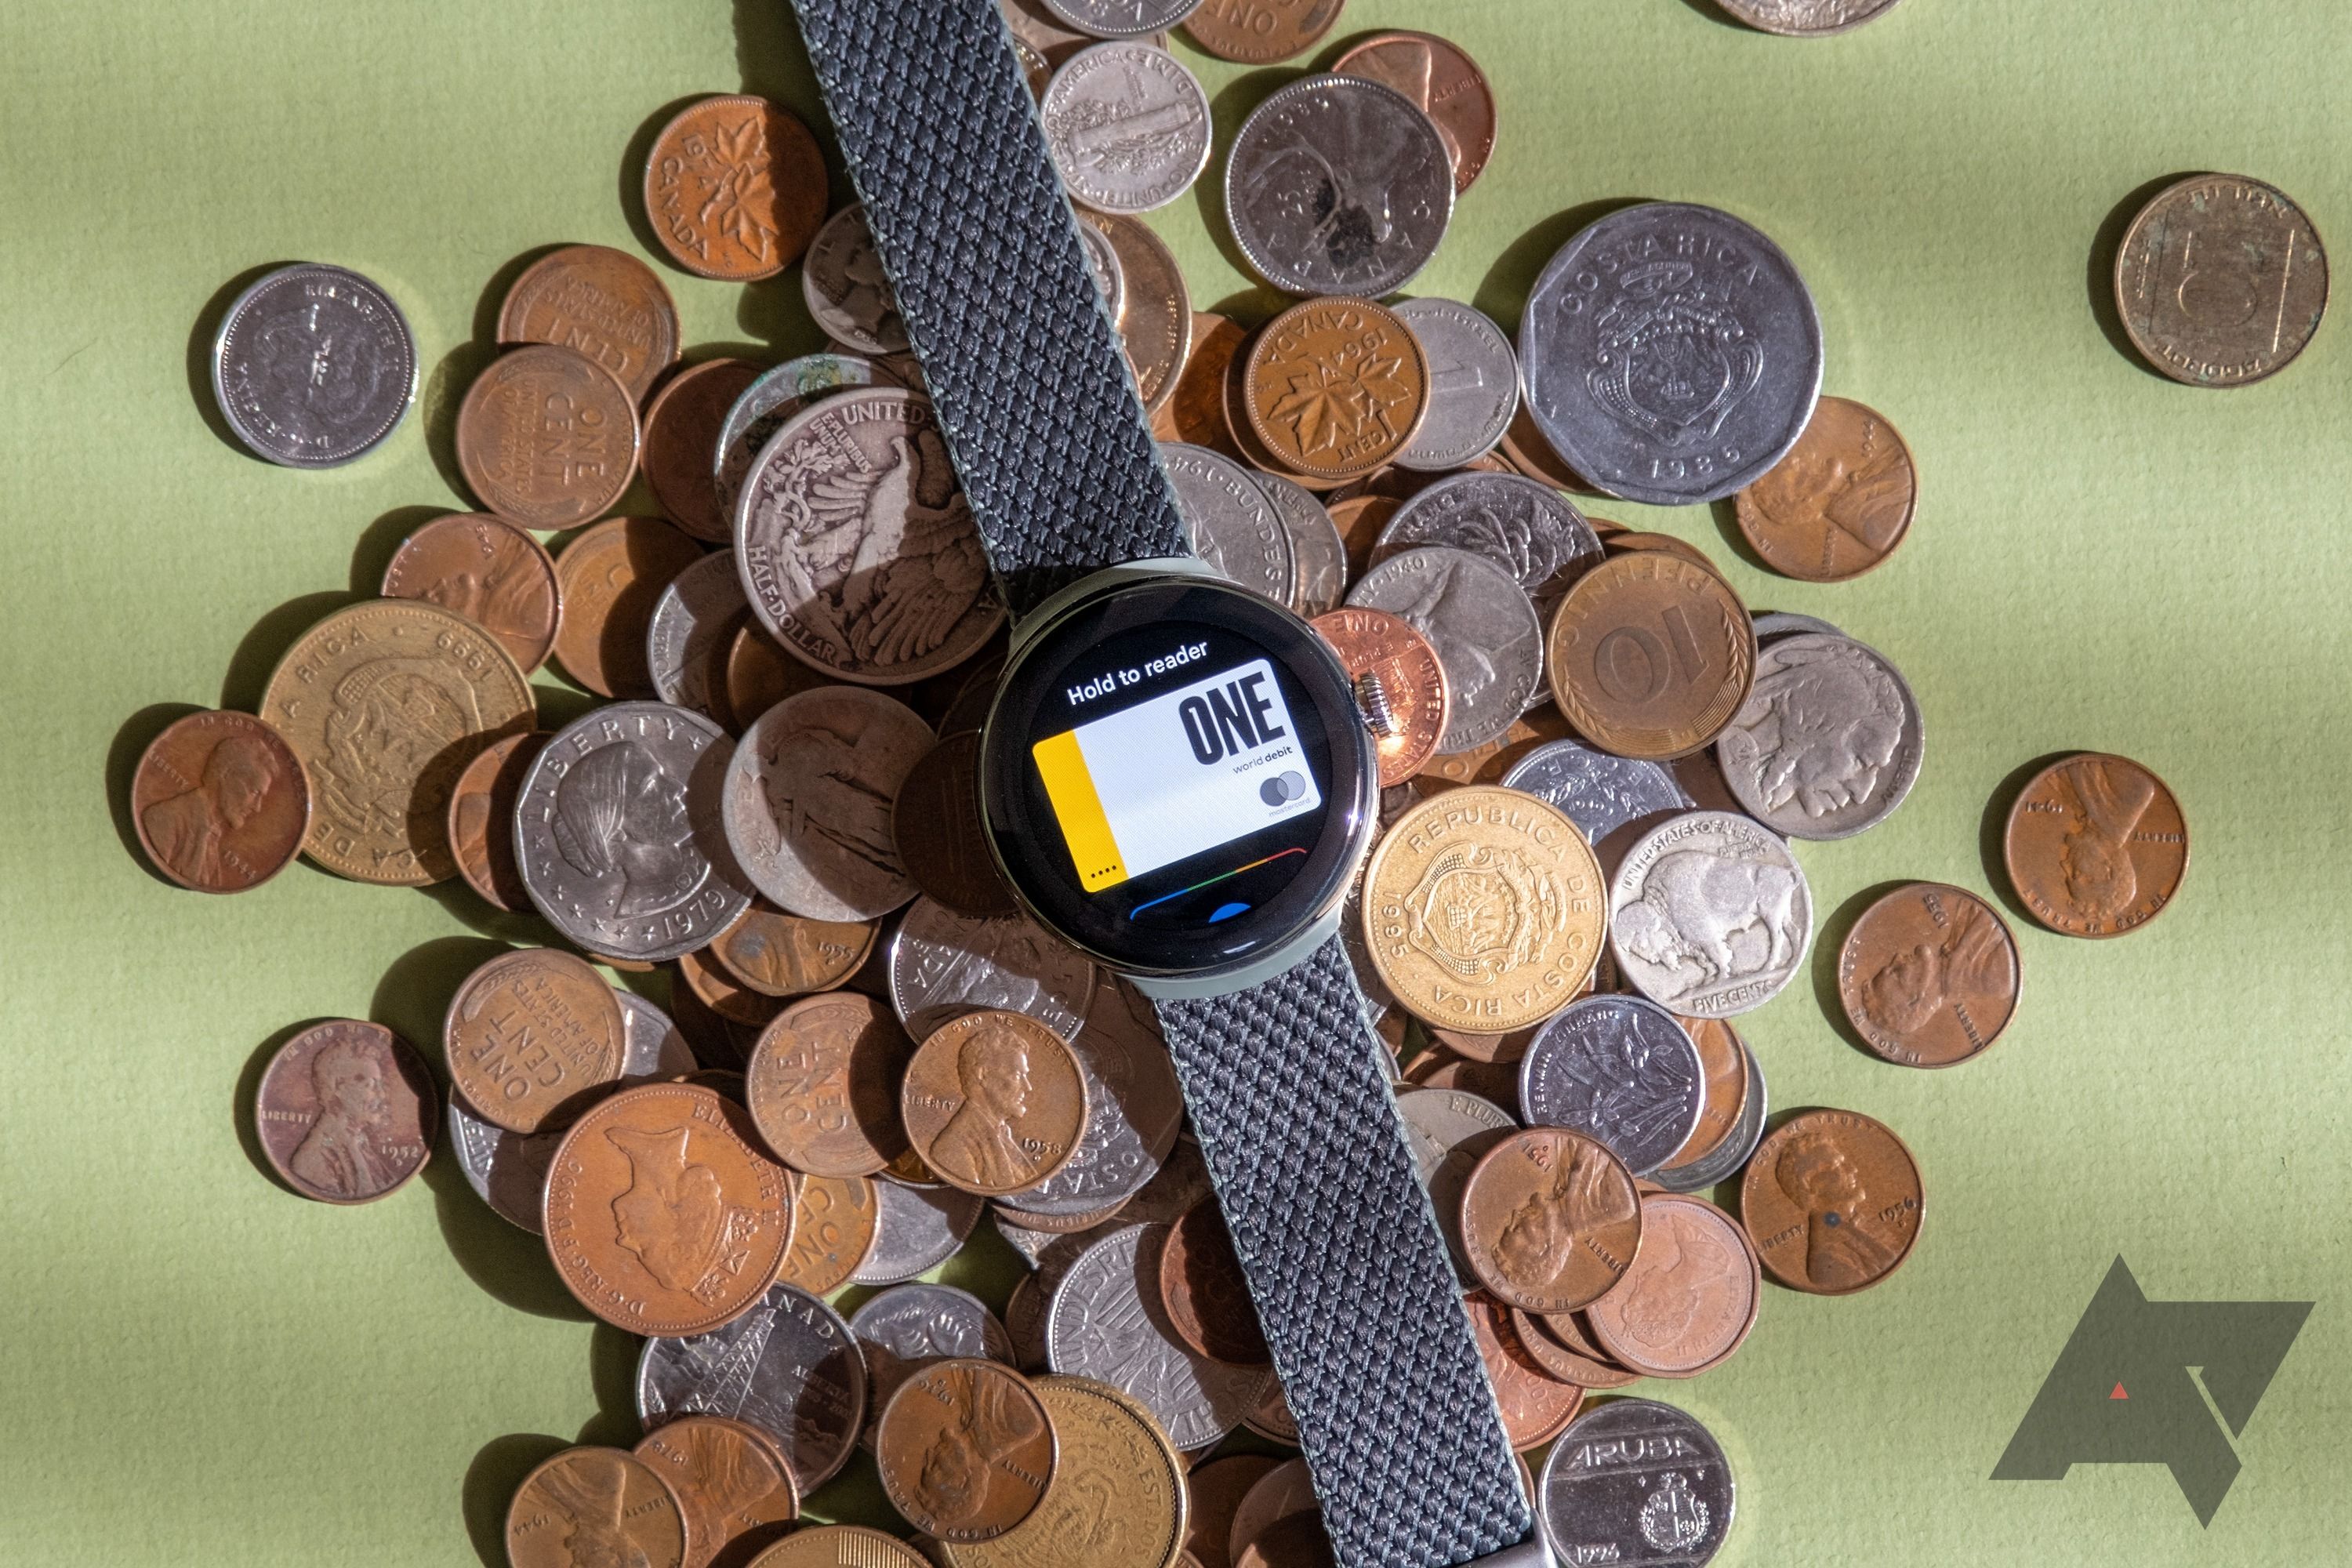 A smartwatch sitting on a pile of coins.